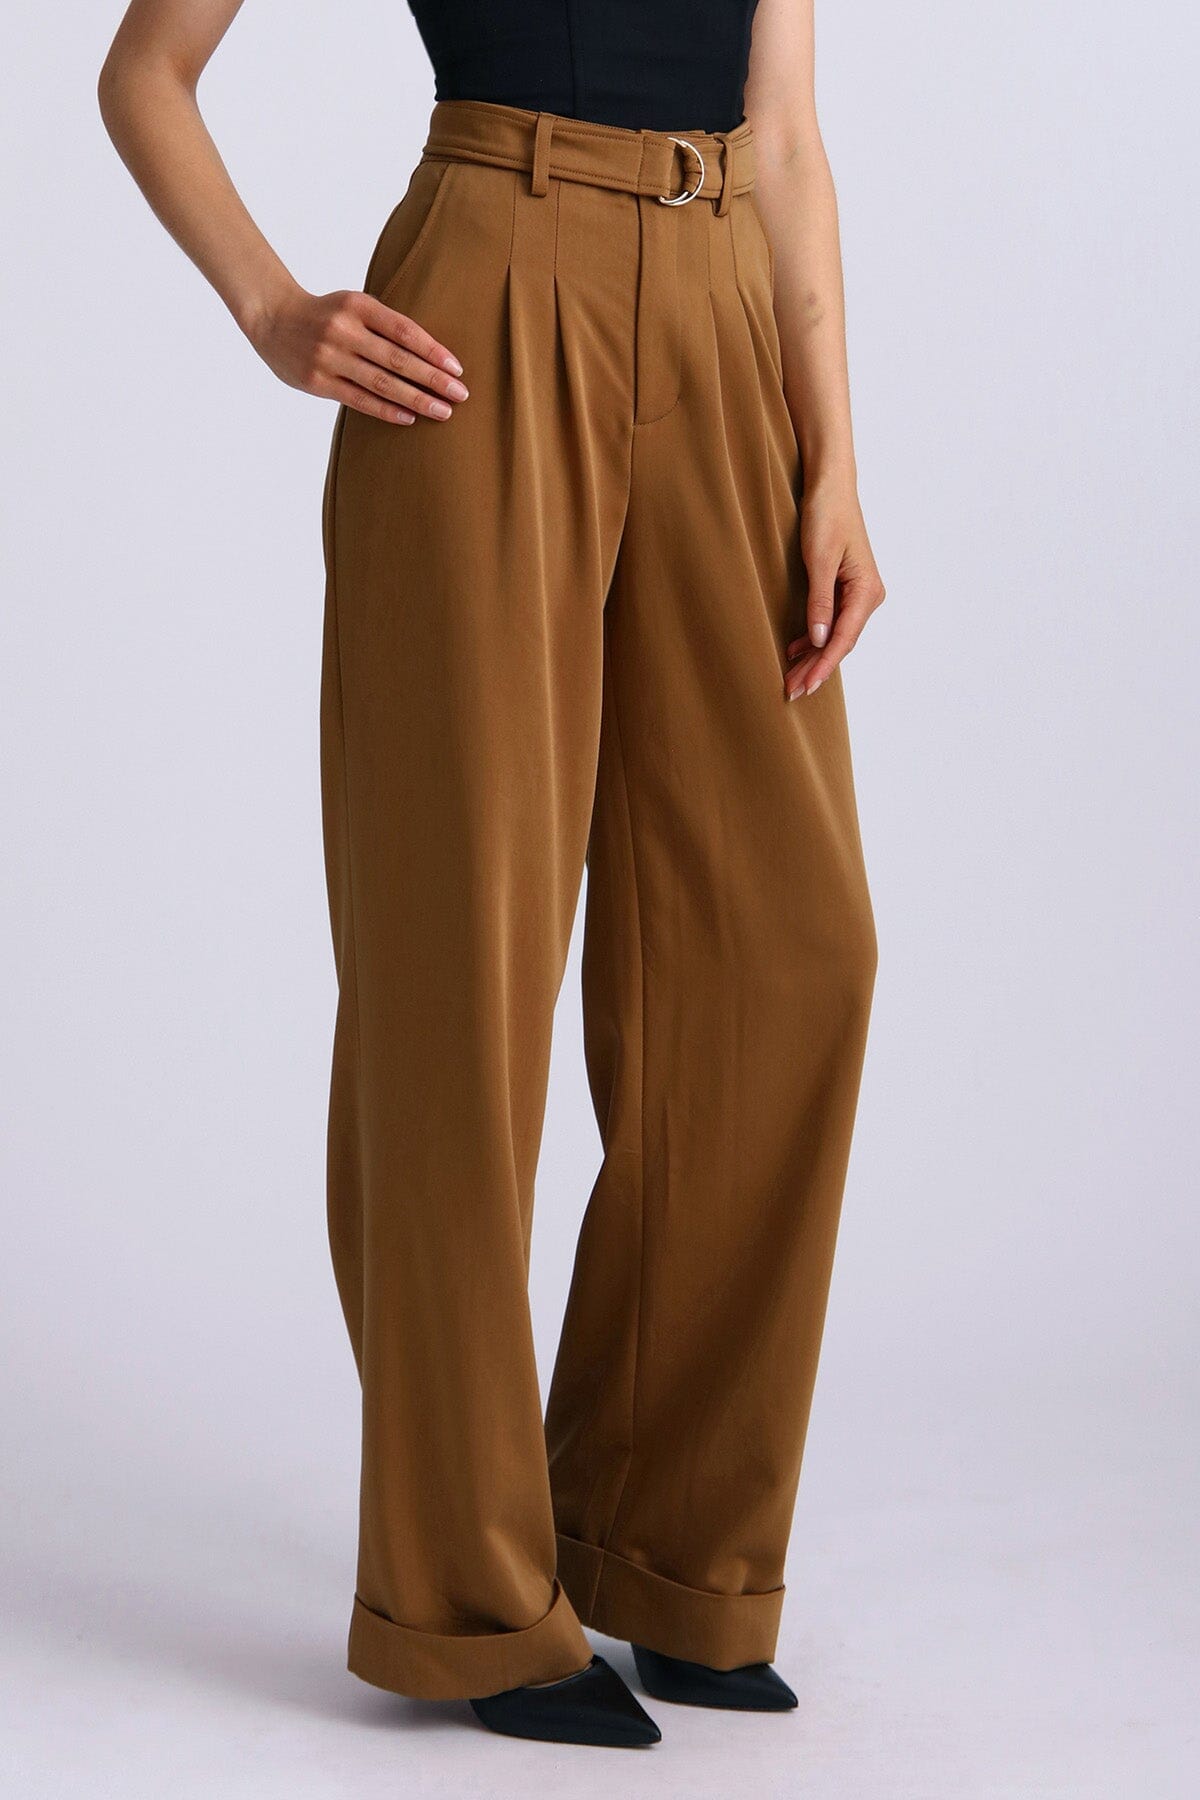 Amber brown lyocell blend belted wide leg trouser pant - women's figure flattering high waisted trousers